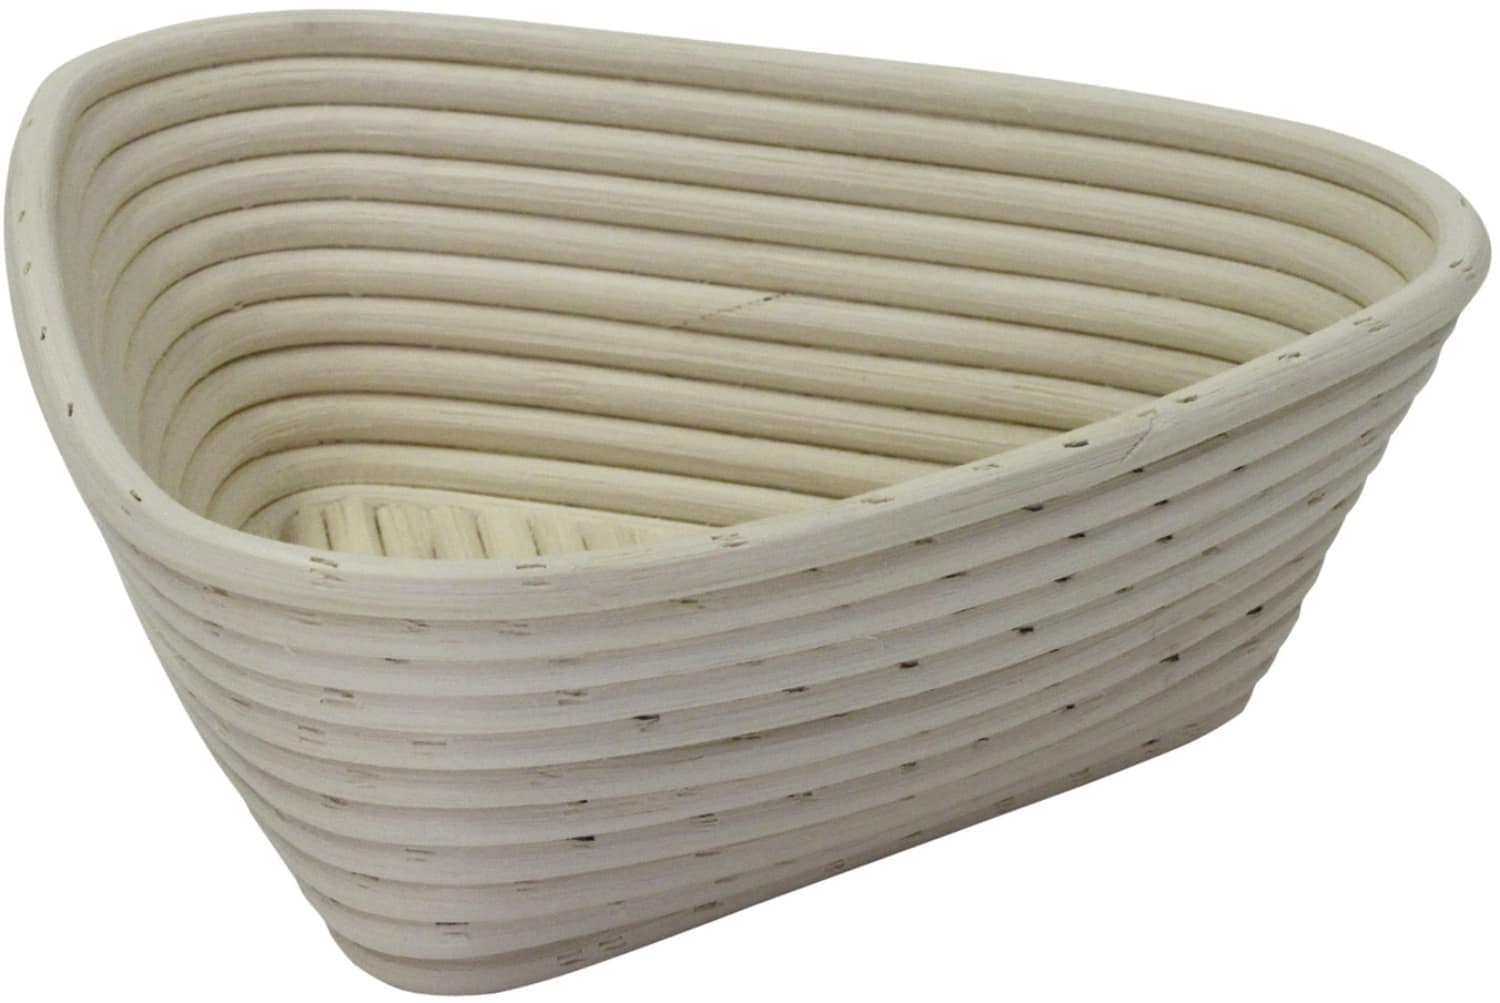 Bread proofing baskets triangle plaited bottom